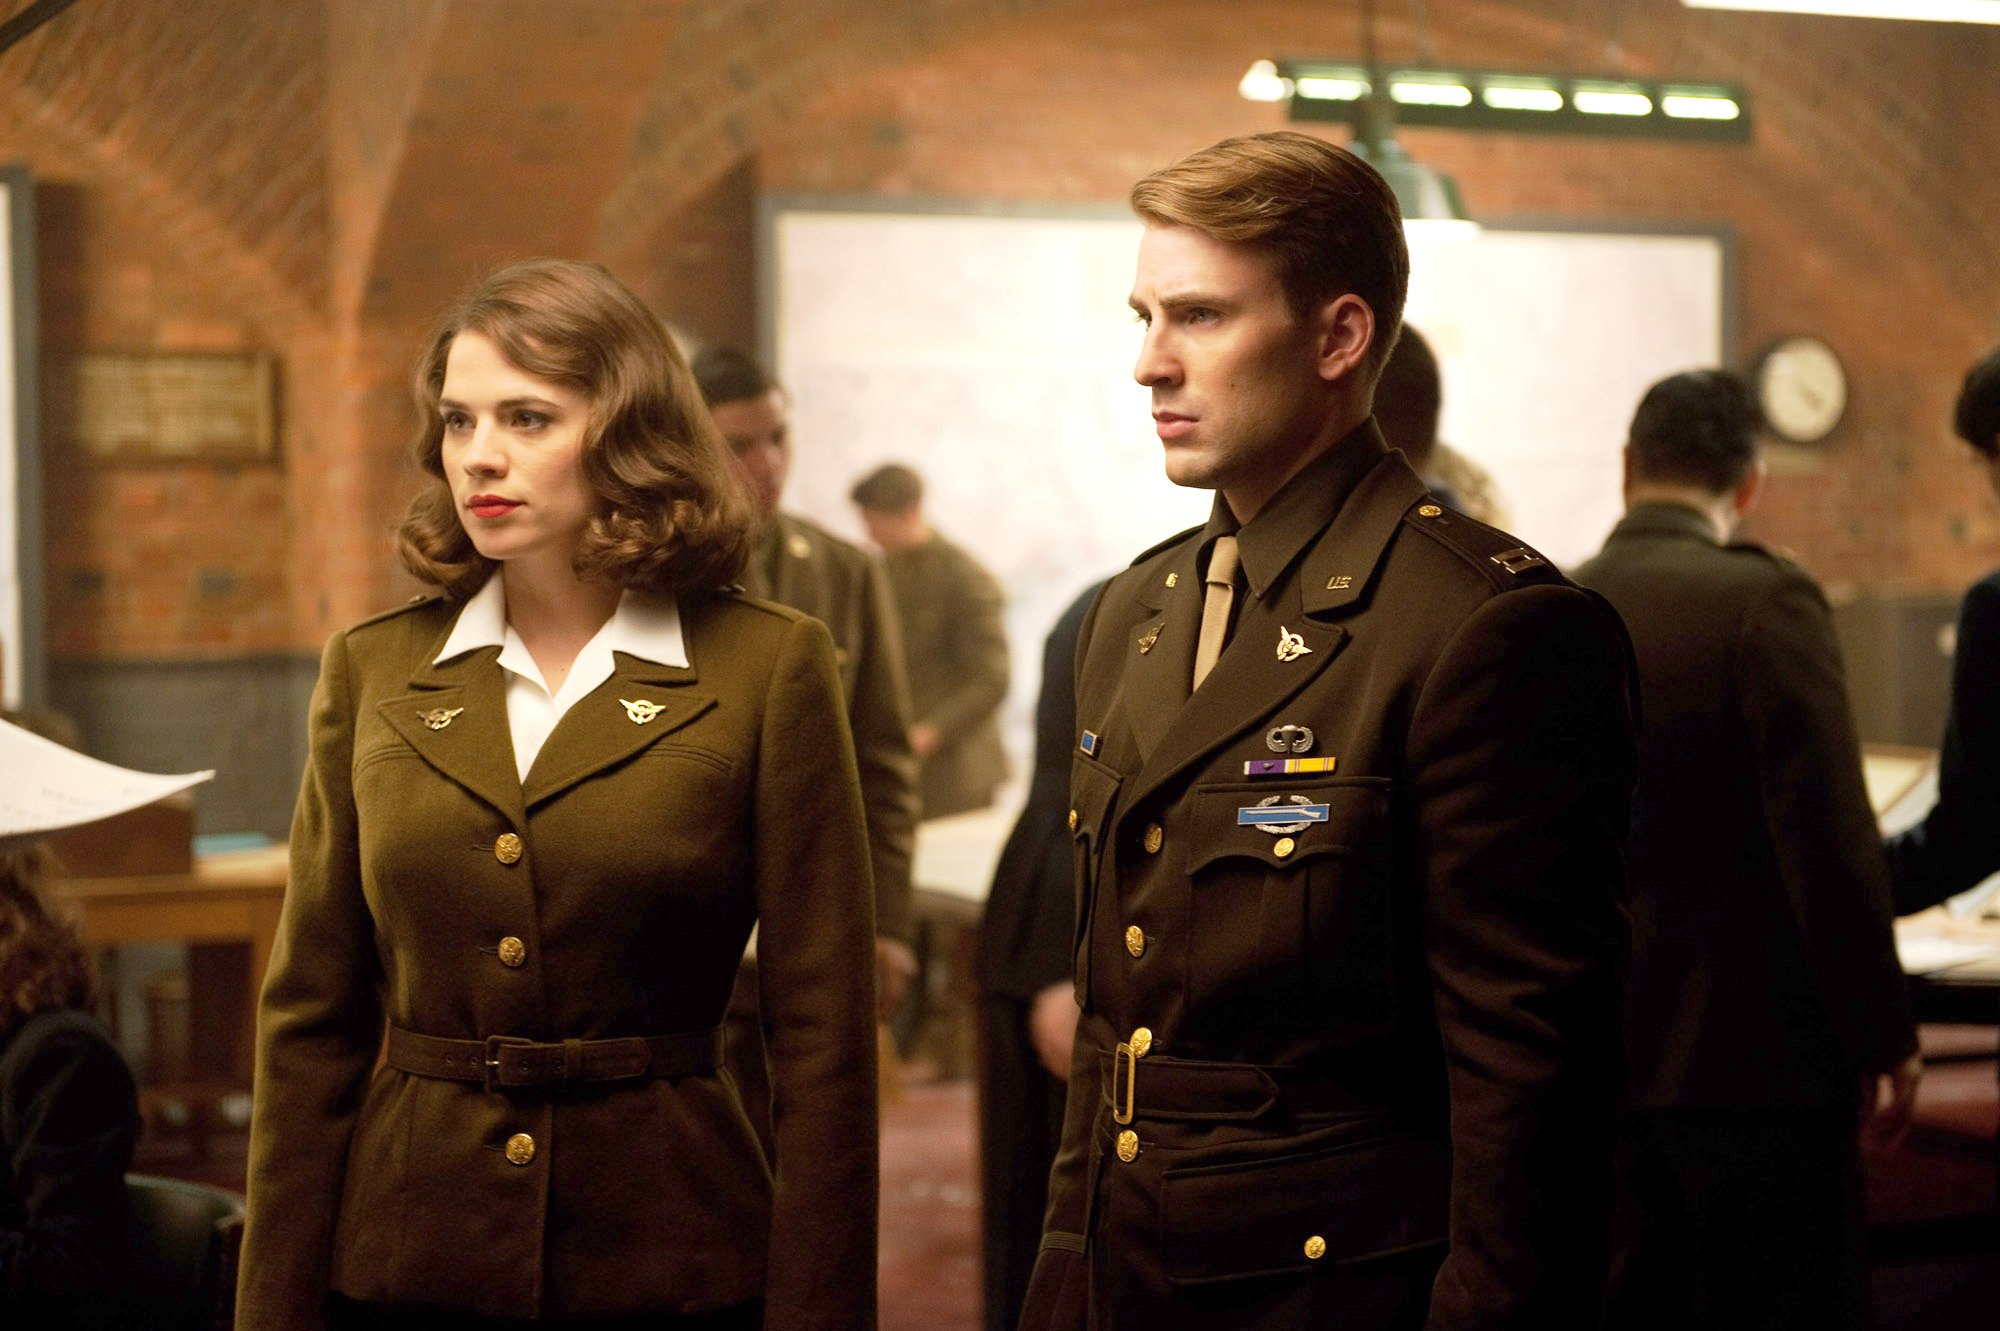 Hayley Atwell stars as Peggy Carter and Chris Evans stars as Steve Rogers in Paramount Pictures' Captain America: The First Avenger (2011). Photo credit by: Jay Maidment.